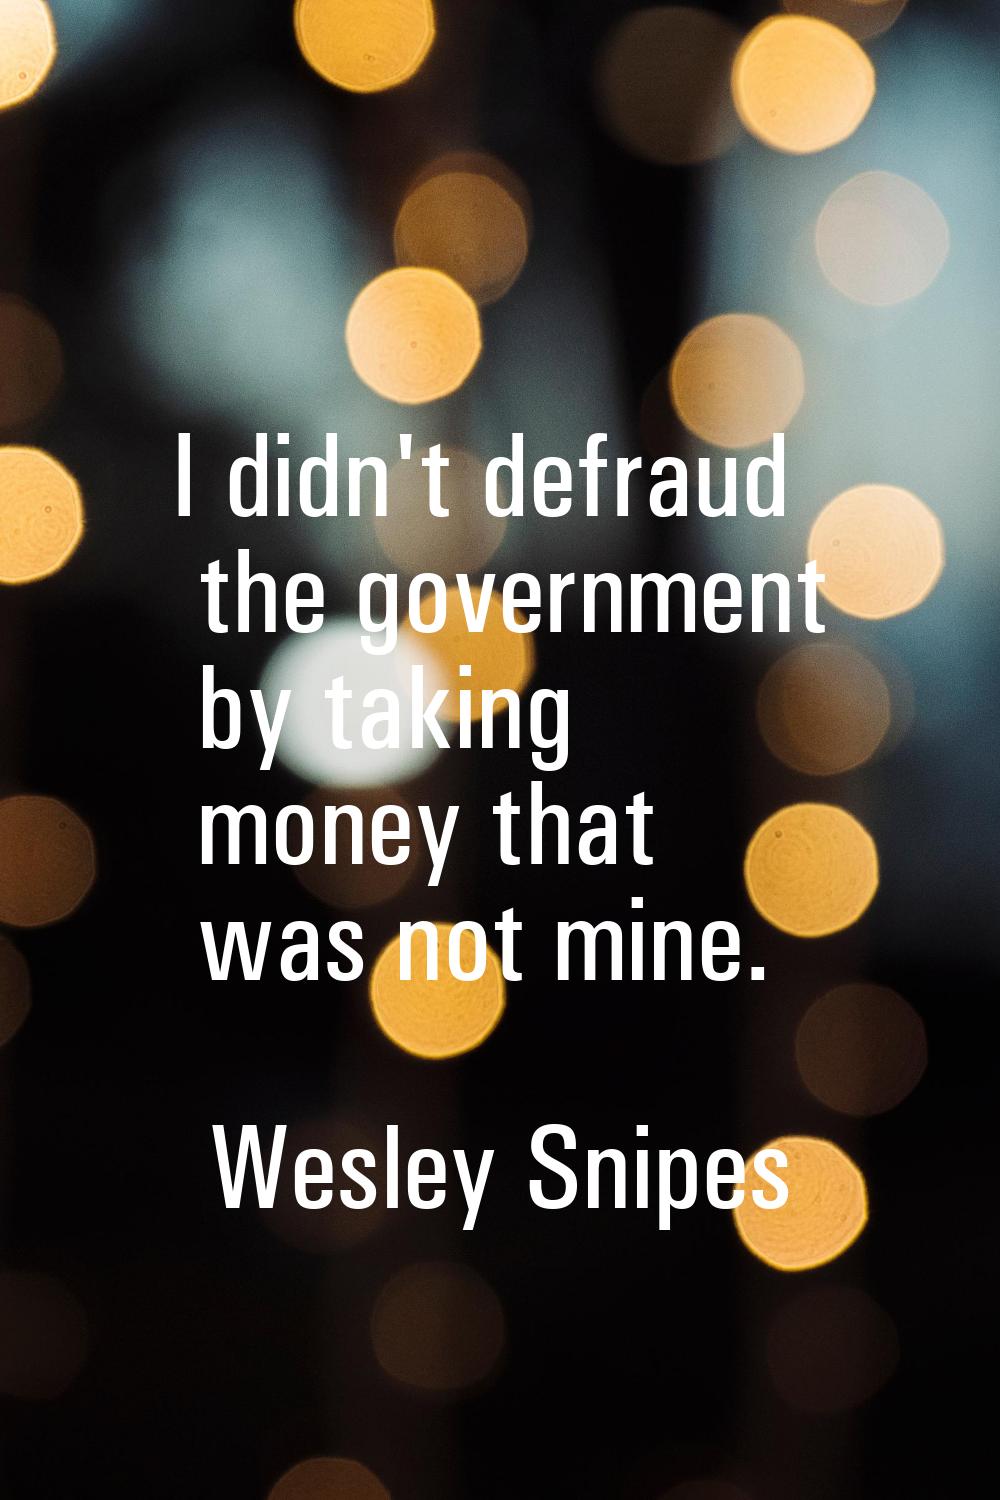 I didn't defraud the government by taking money that was not mine.